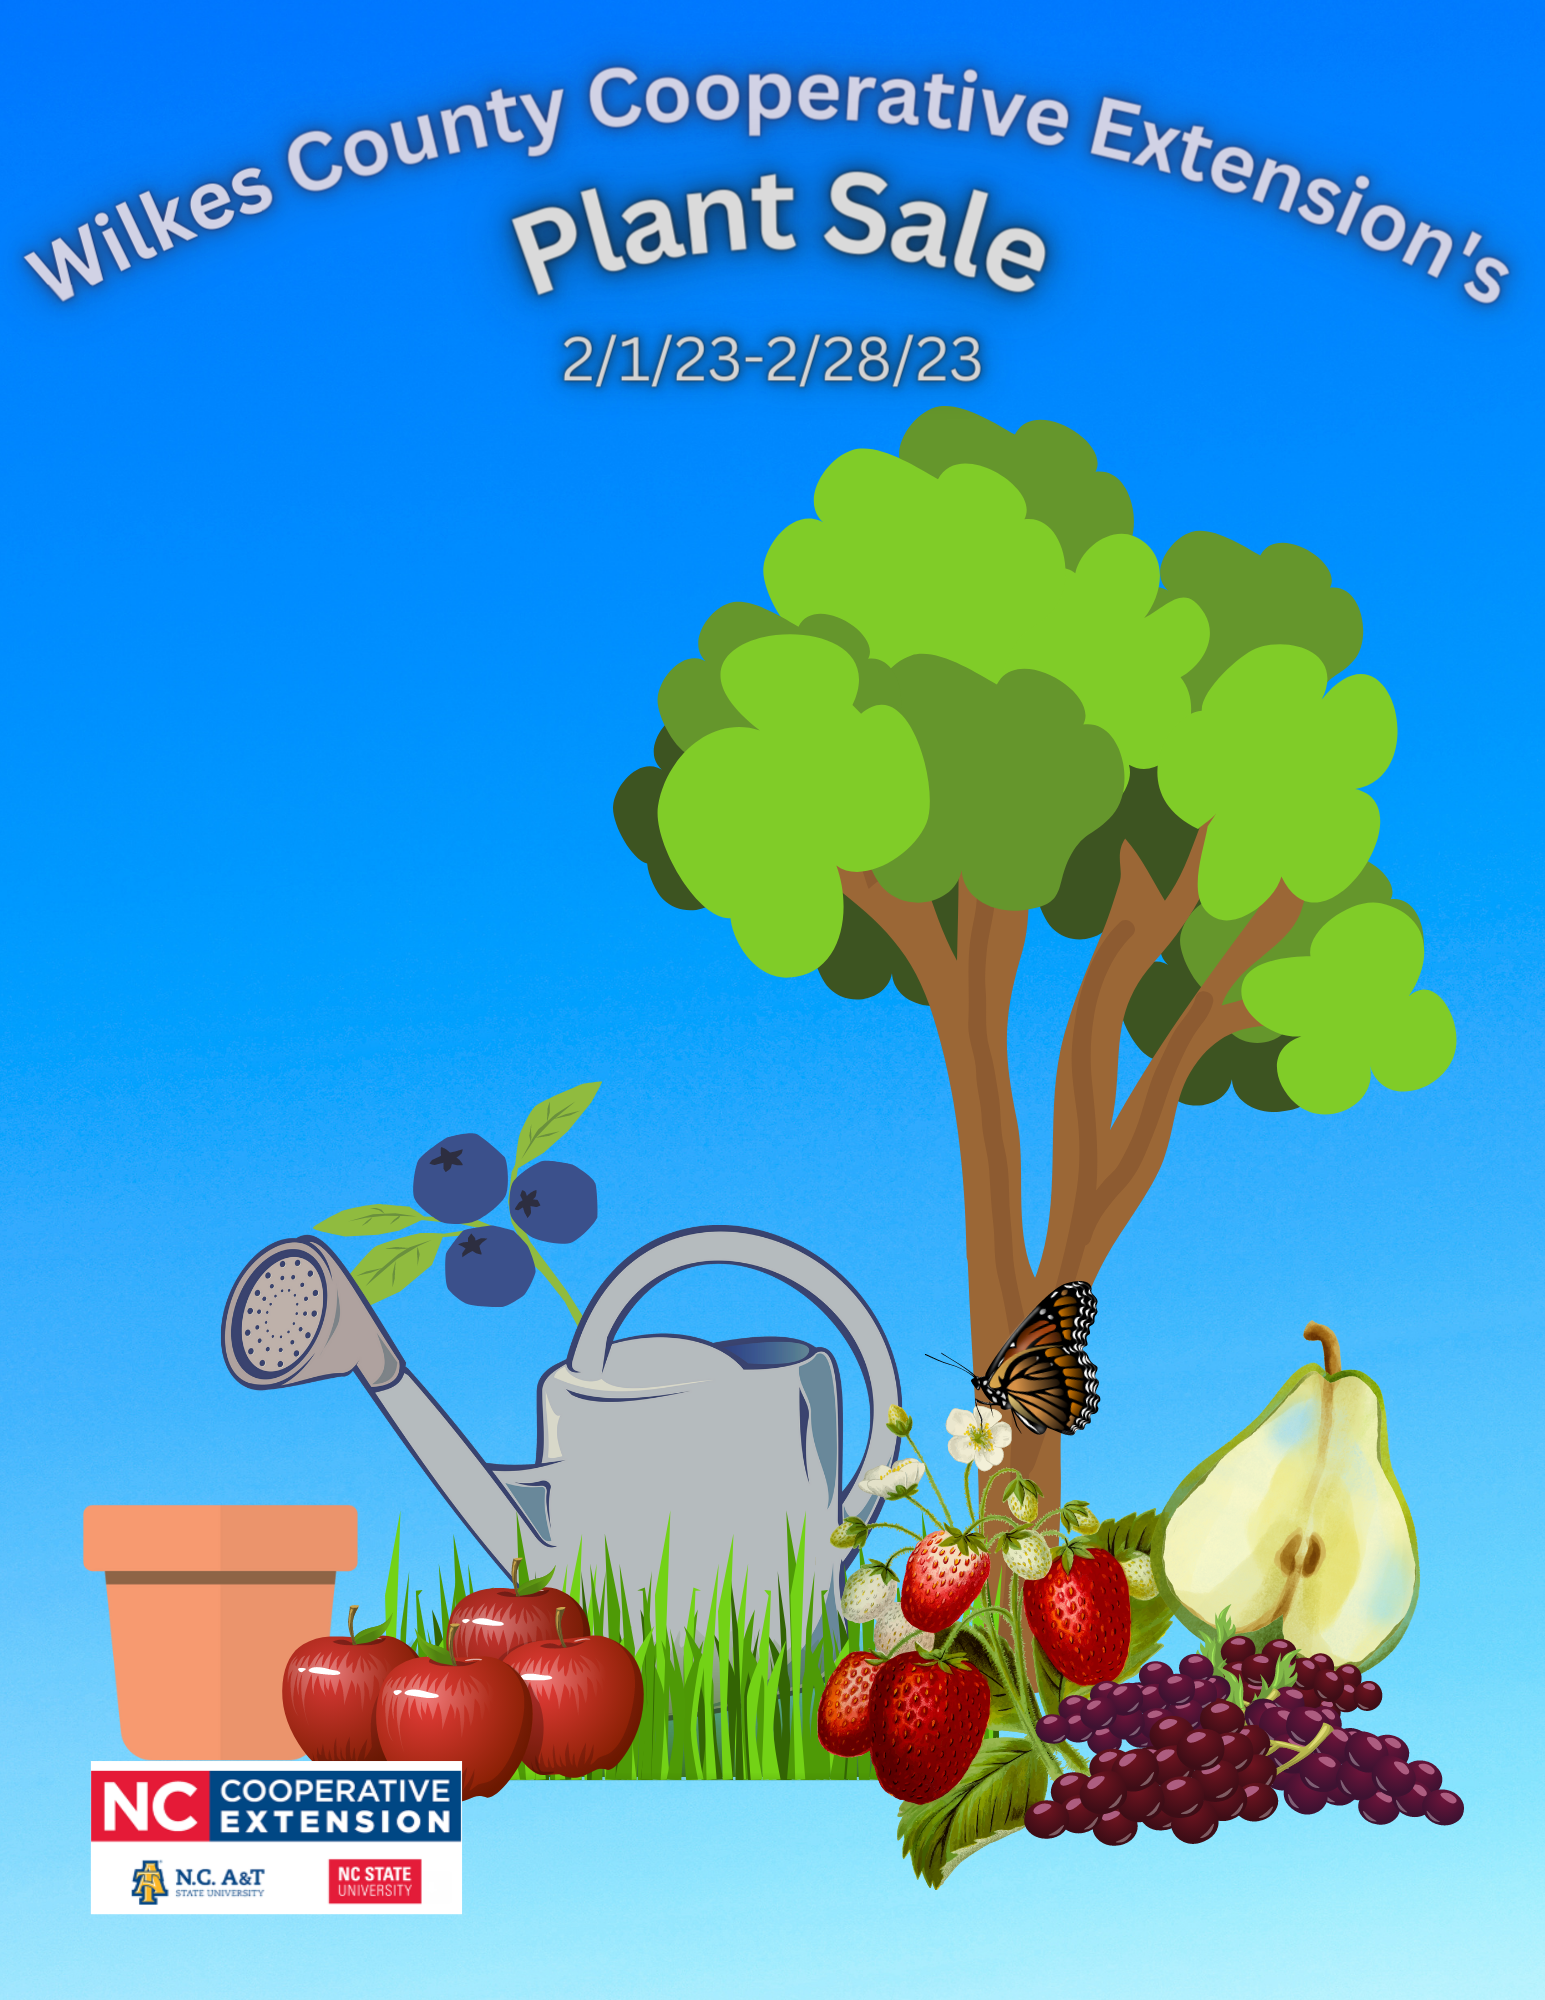 N.C. Cooperative Extension, Wilkes County Center's Plant Sale. 2/1/23 – 2/28/23